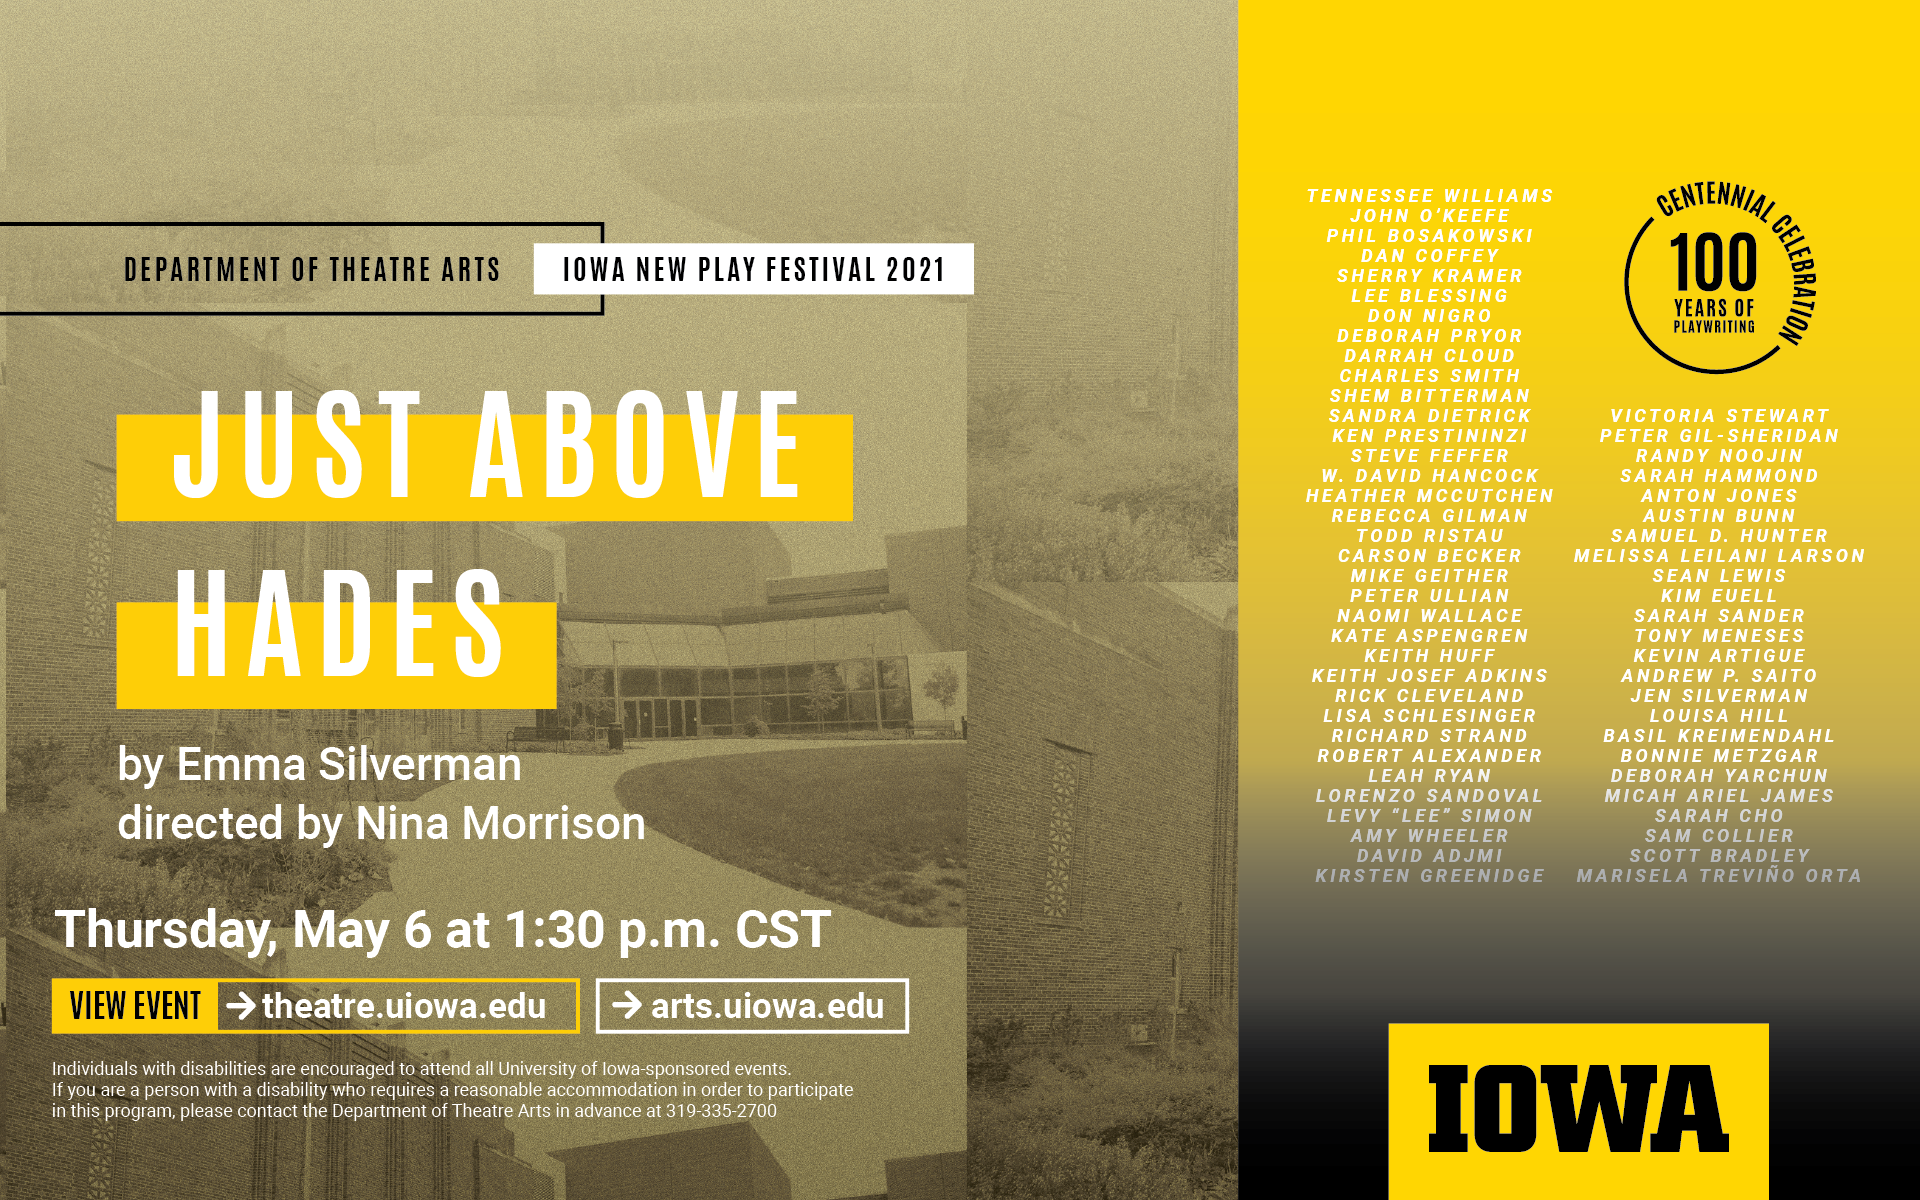 Just Above Hades. By Emma Silverman, directed by Nina Morrison. Thursday, May 6 at 1:30 p.m. CST. theatre.uiowa.edu.